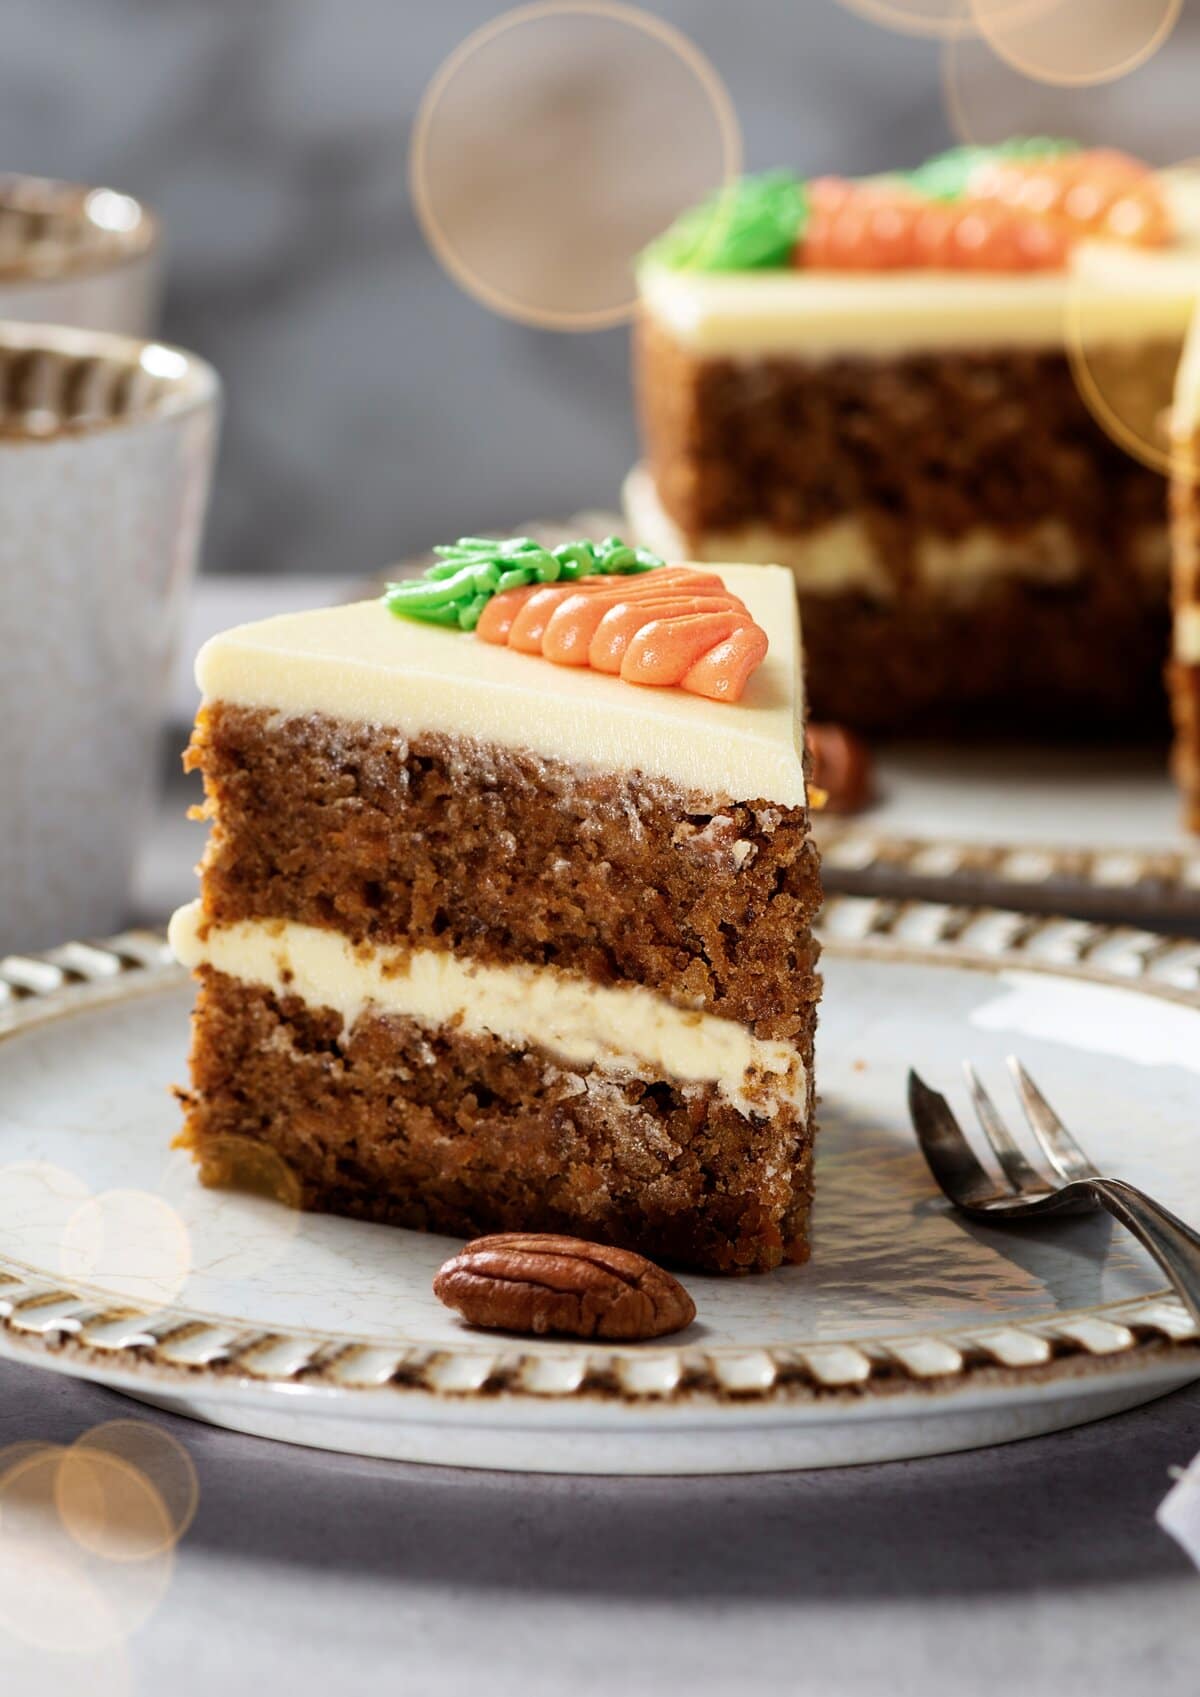 A serving of carrot cake